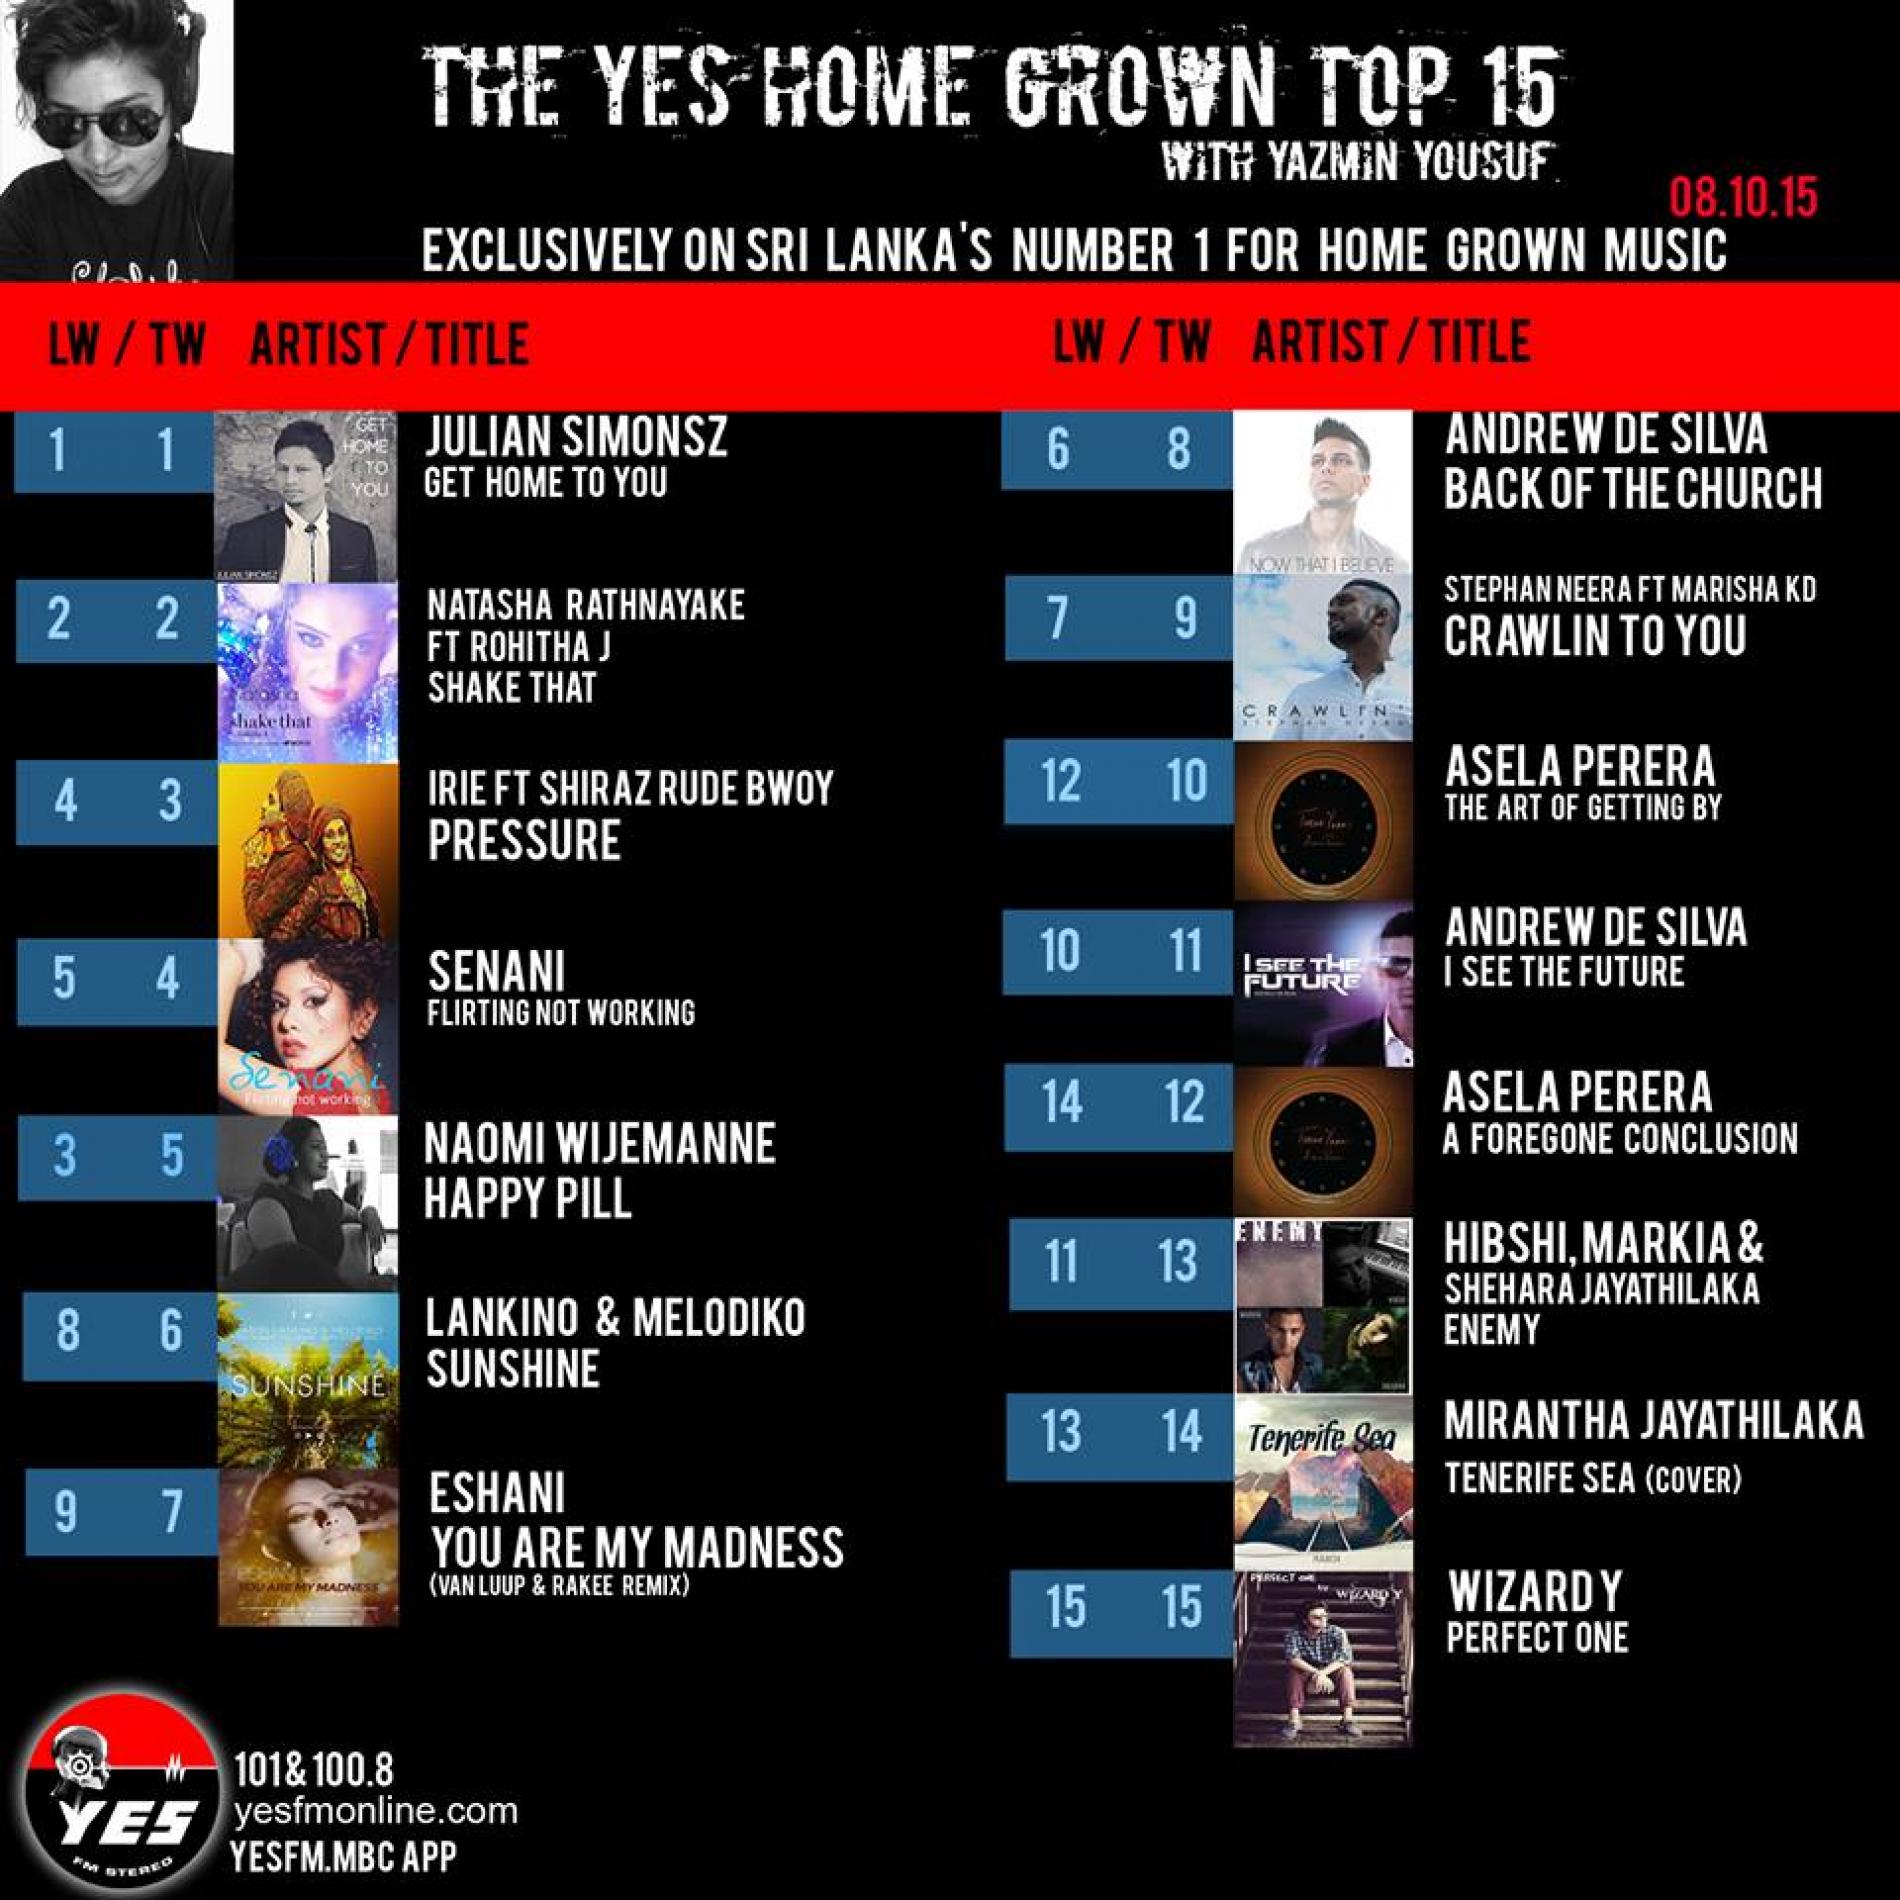 Its 4 weeks on top the YES Home Grown Top 15 For Julian Simonsz